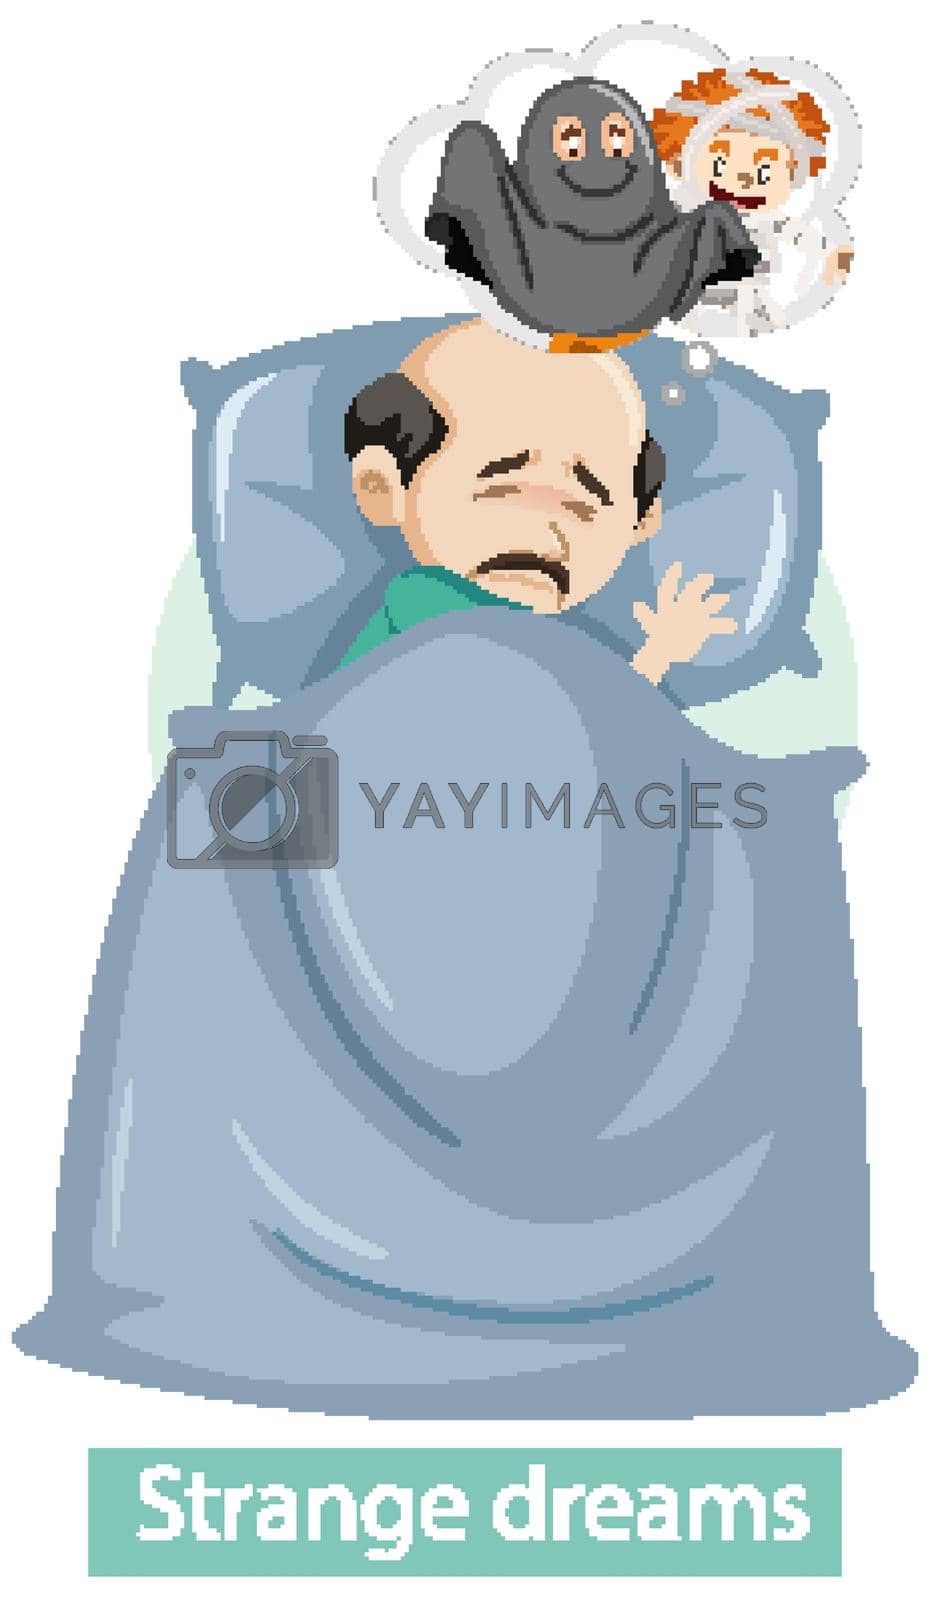 Royalty free image of Cartoon character with strange dreams symptoms by iimages